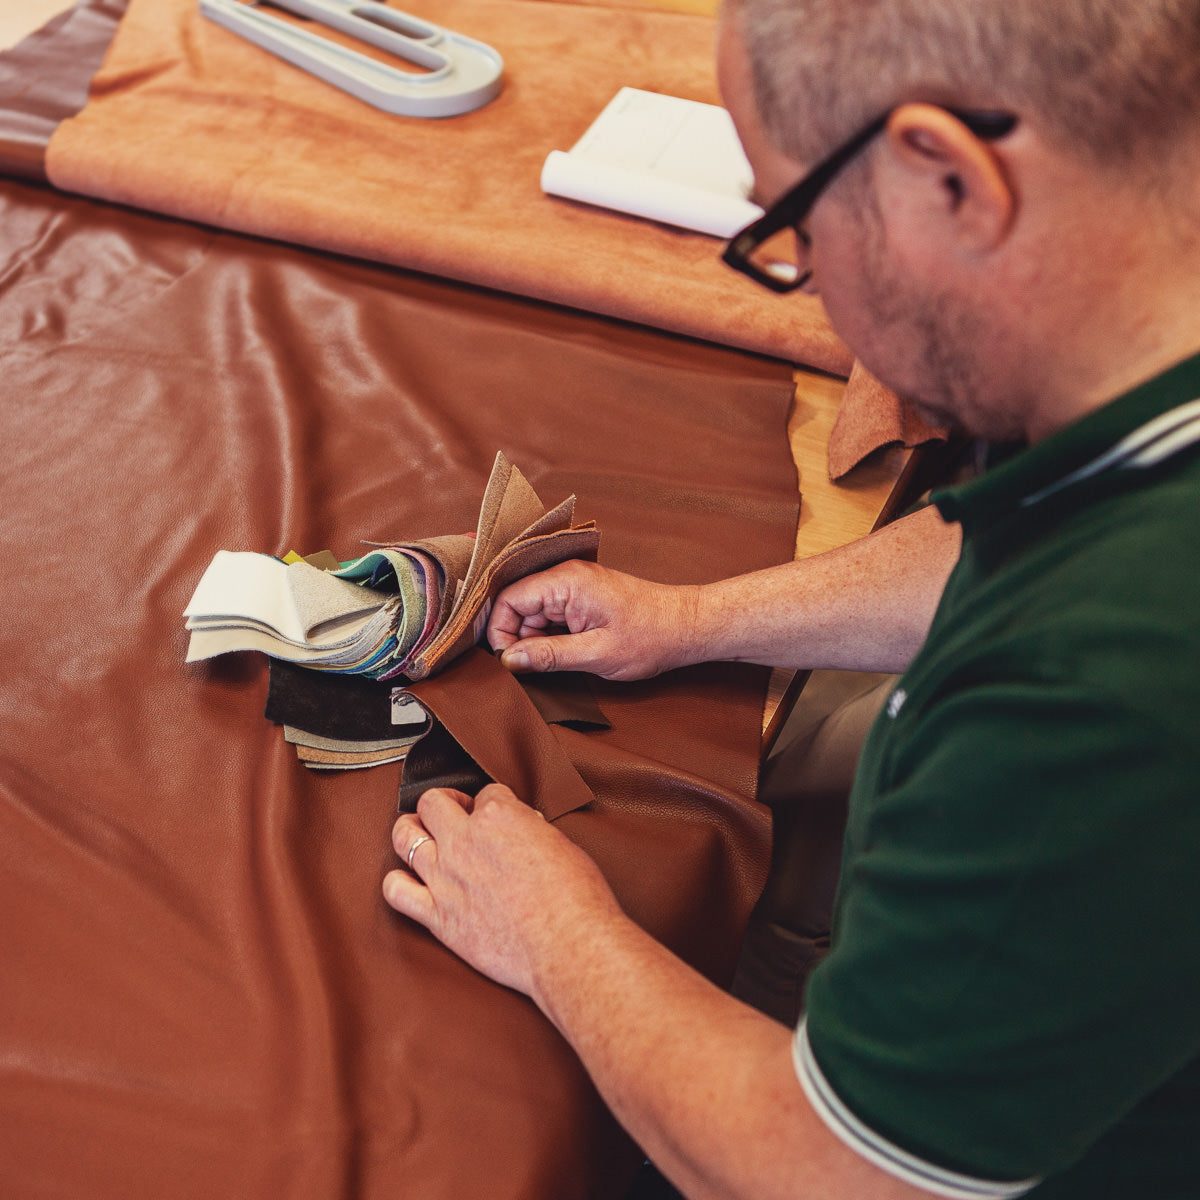 excellent quality upholstery leather materials for